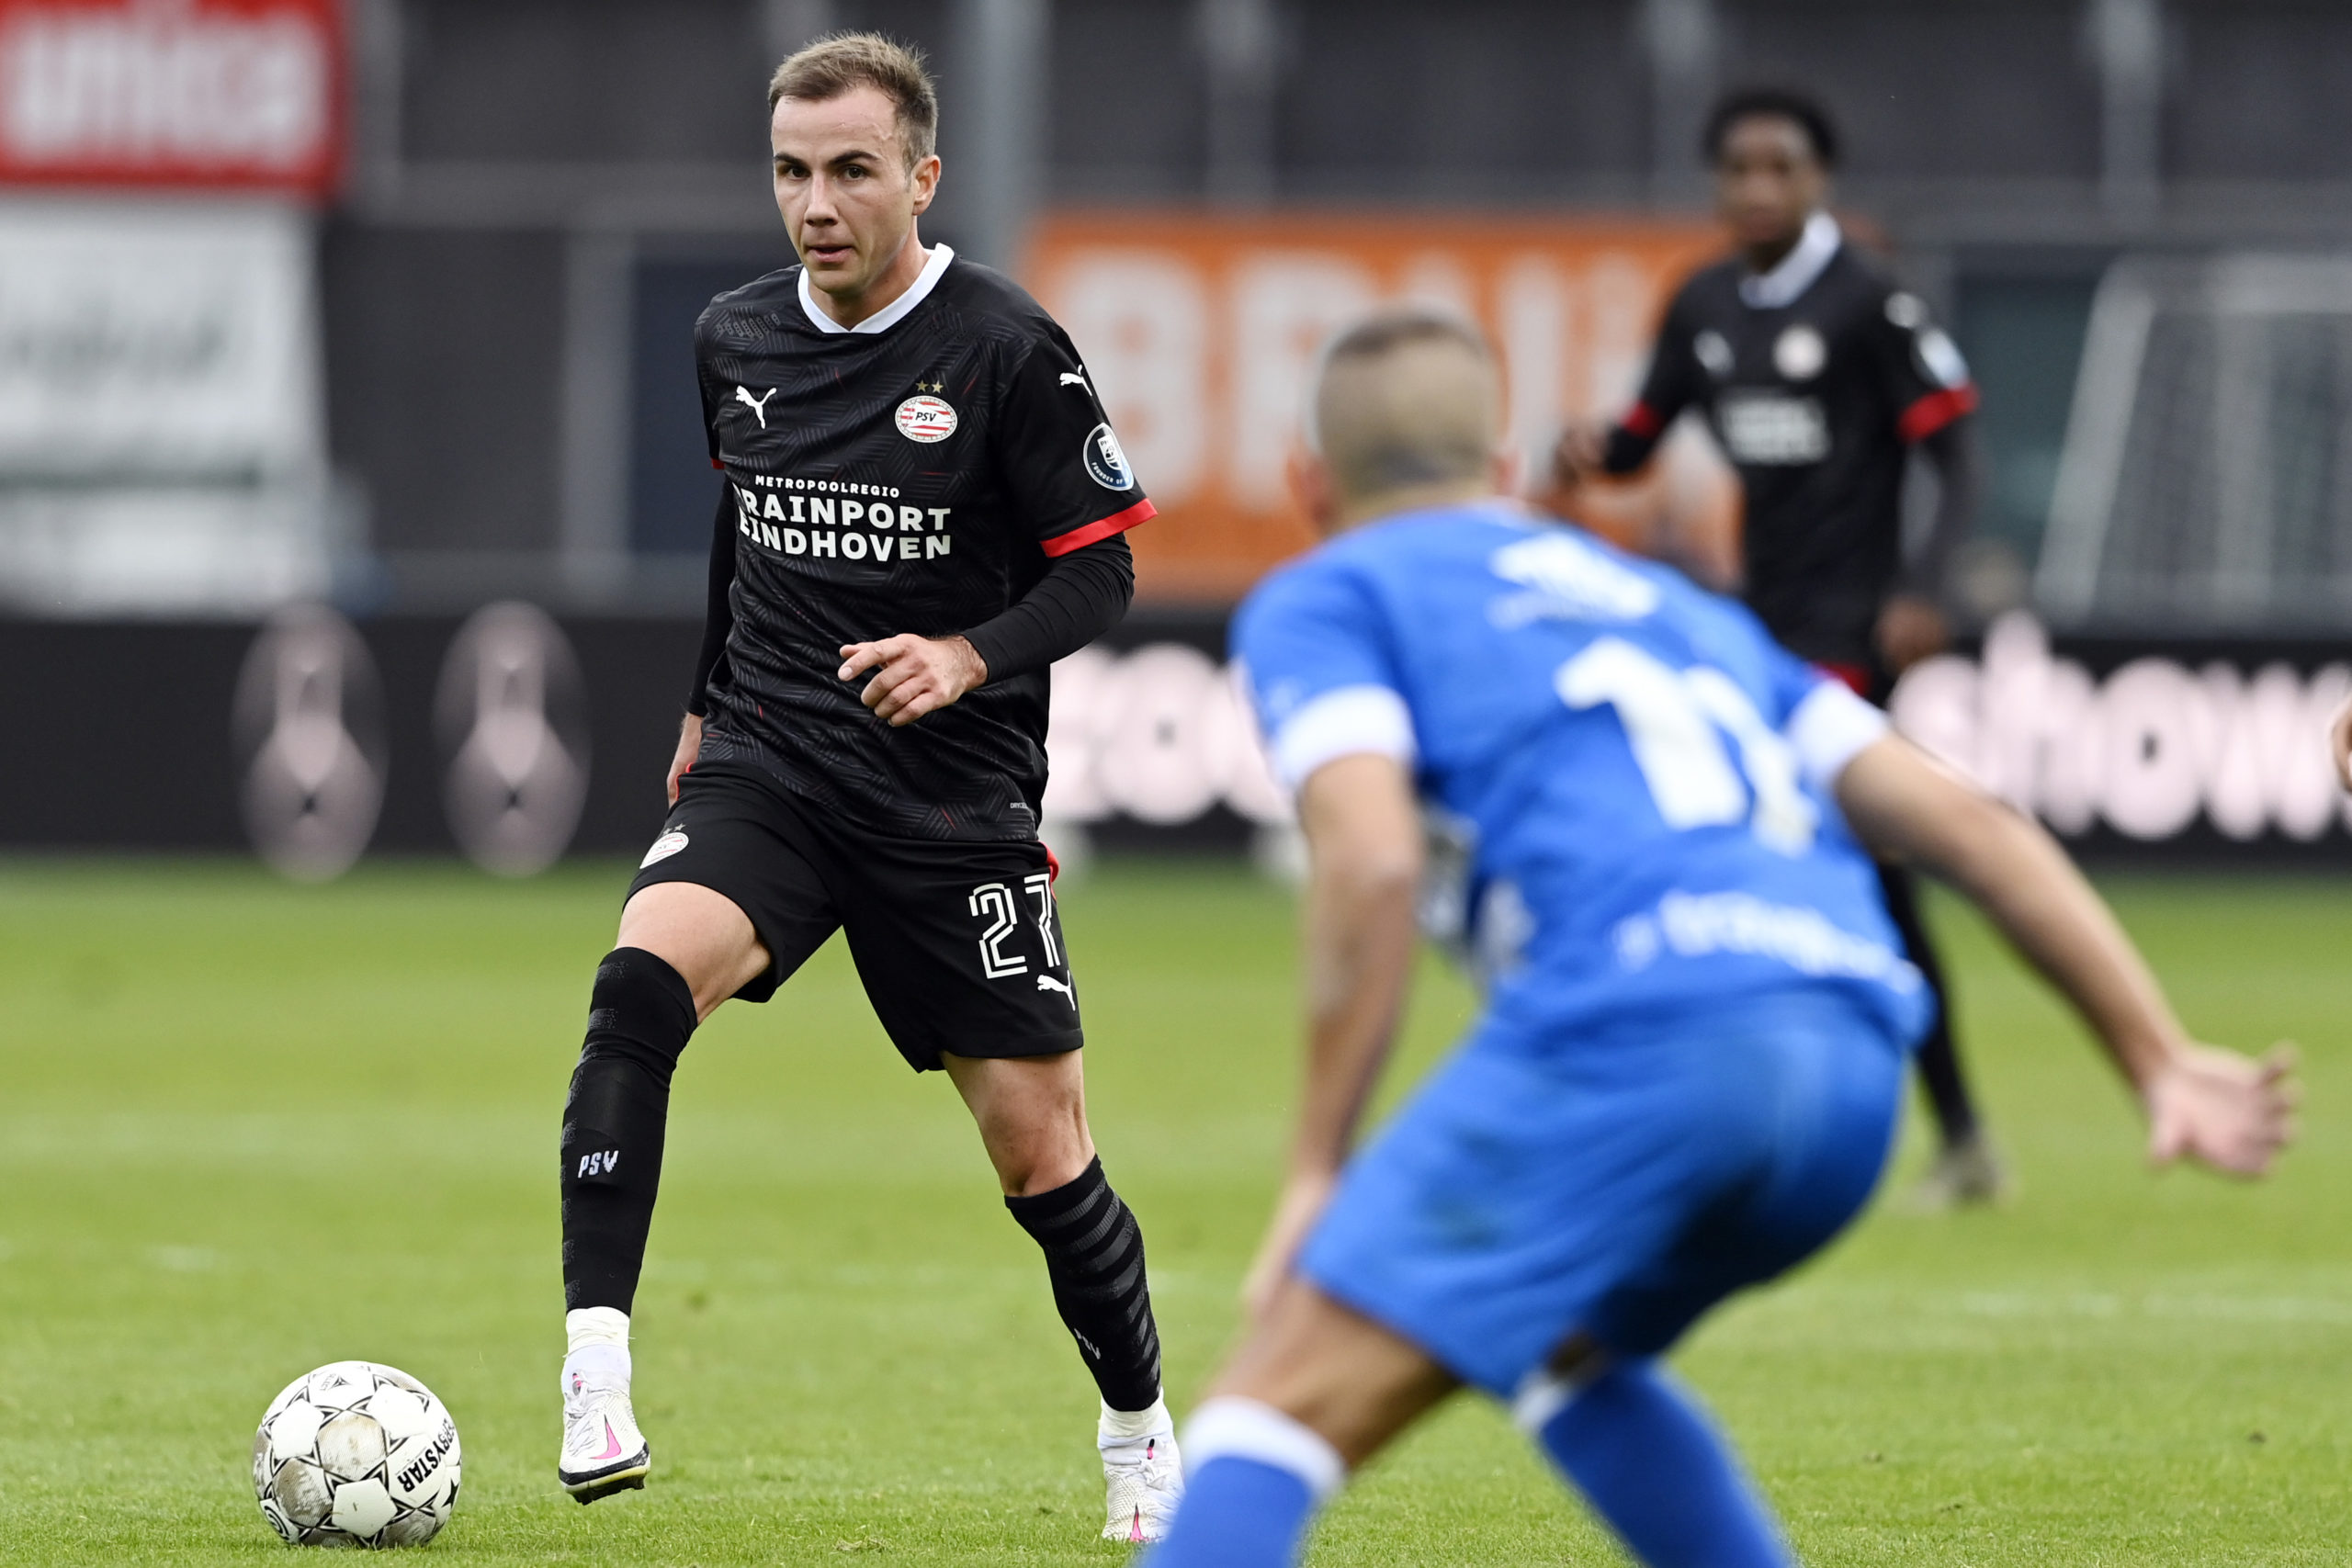 Mario Götze with the ball for PSV EIndhoven against an unidentified PEC Zwolle defender